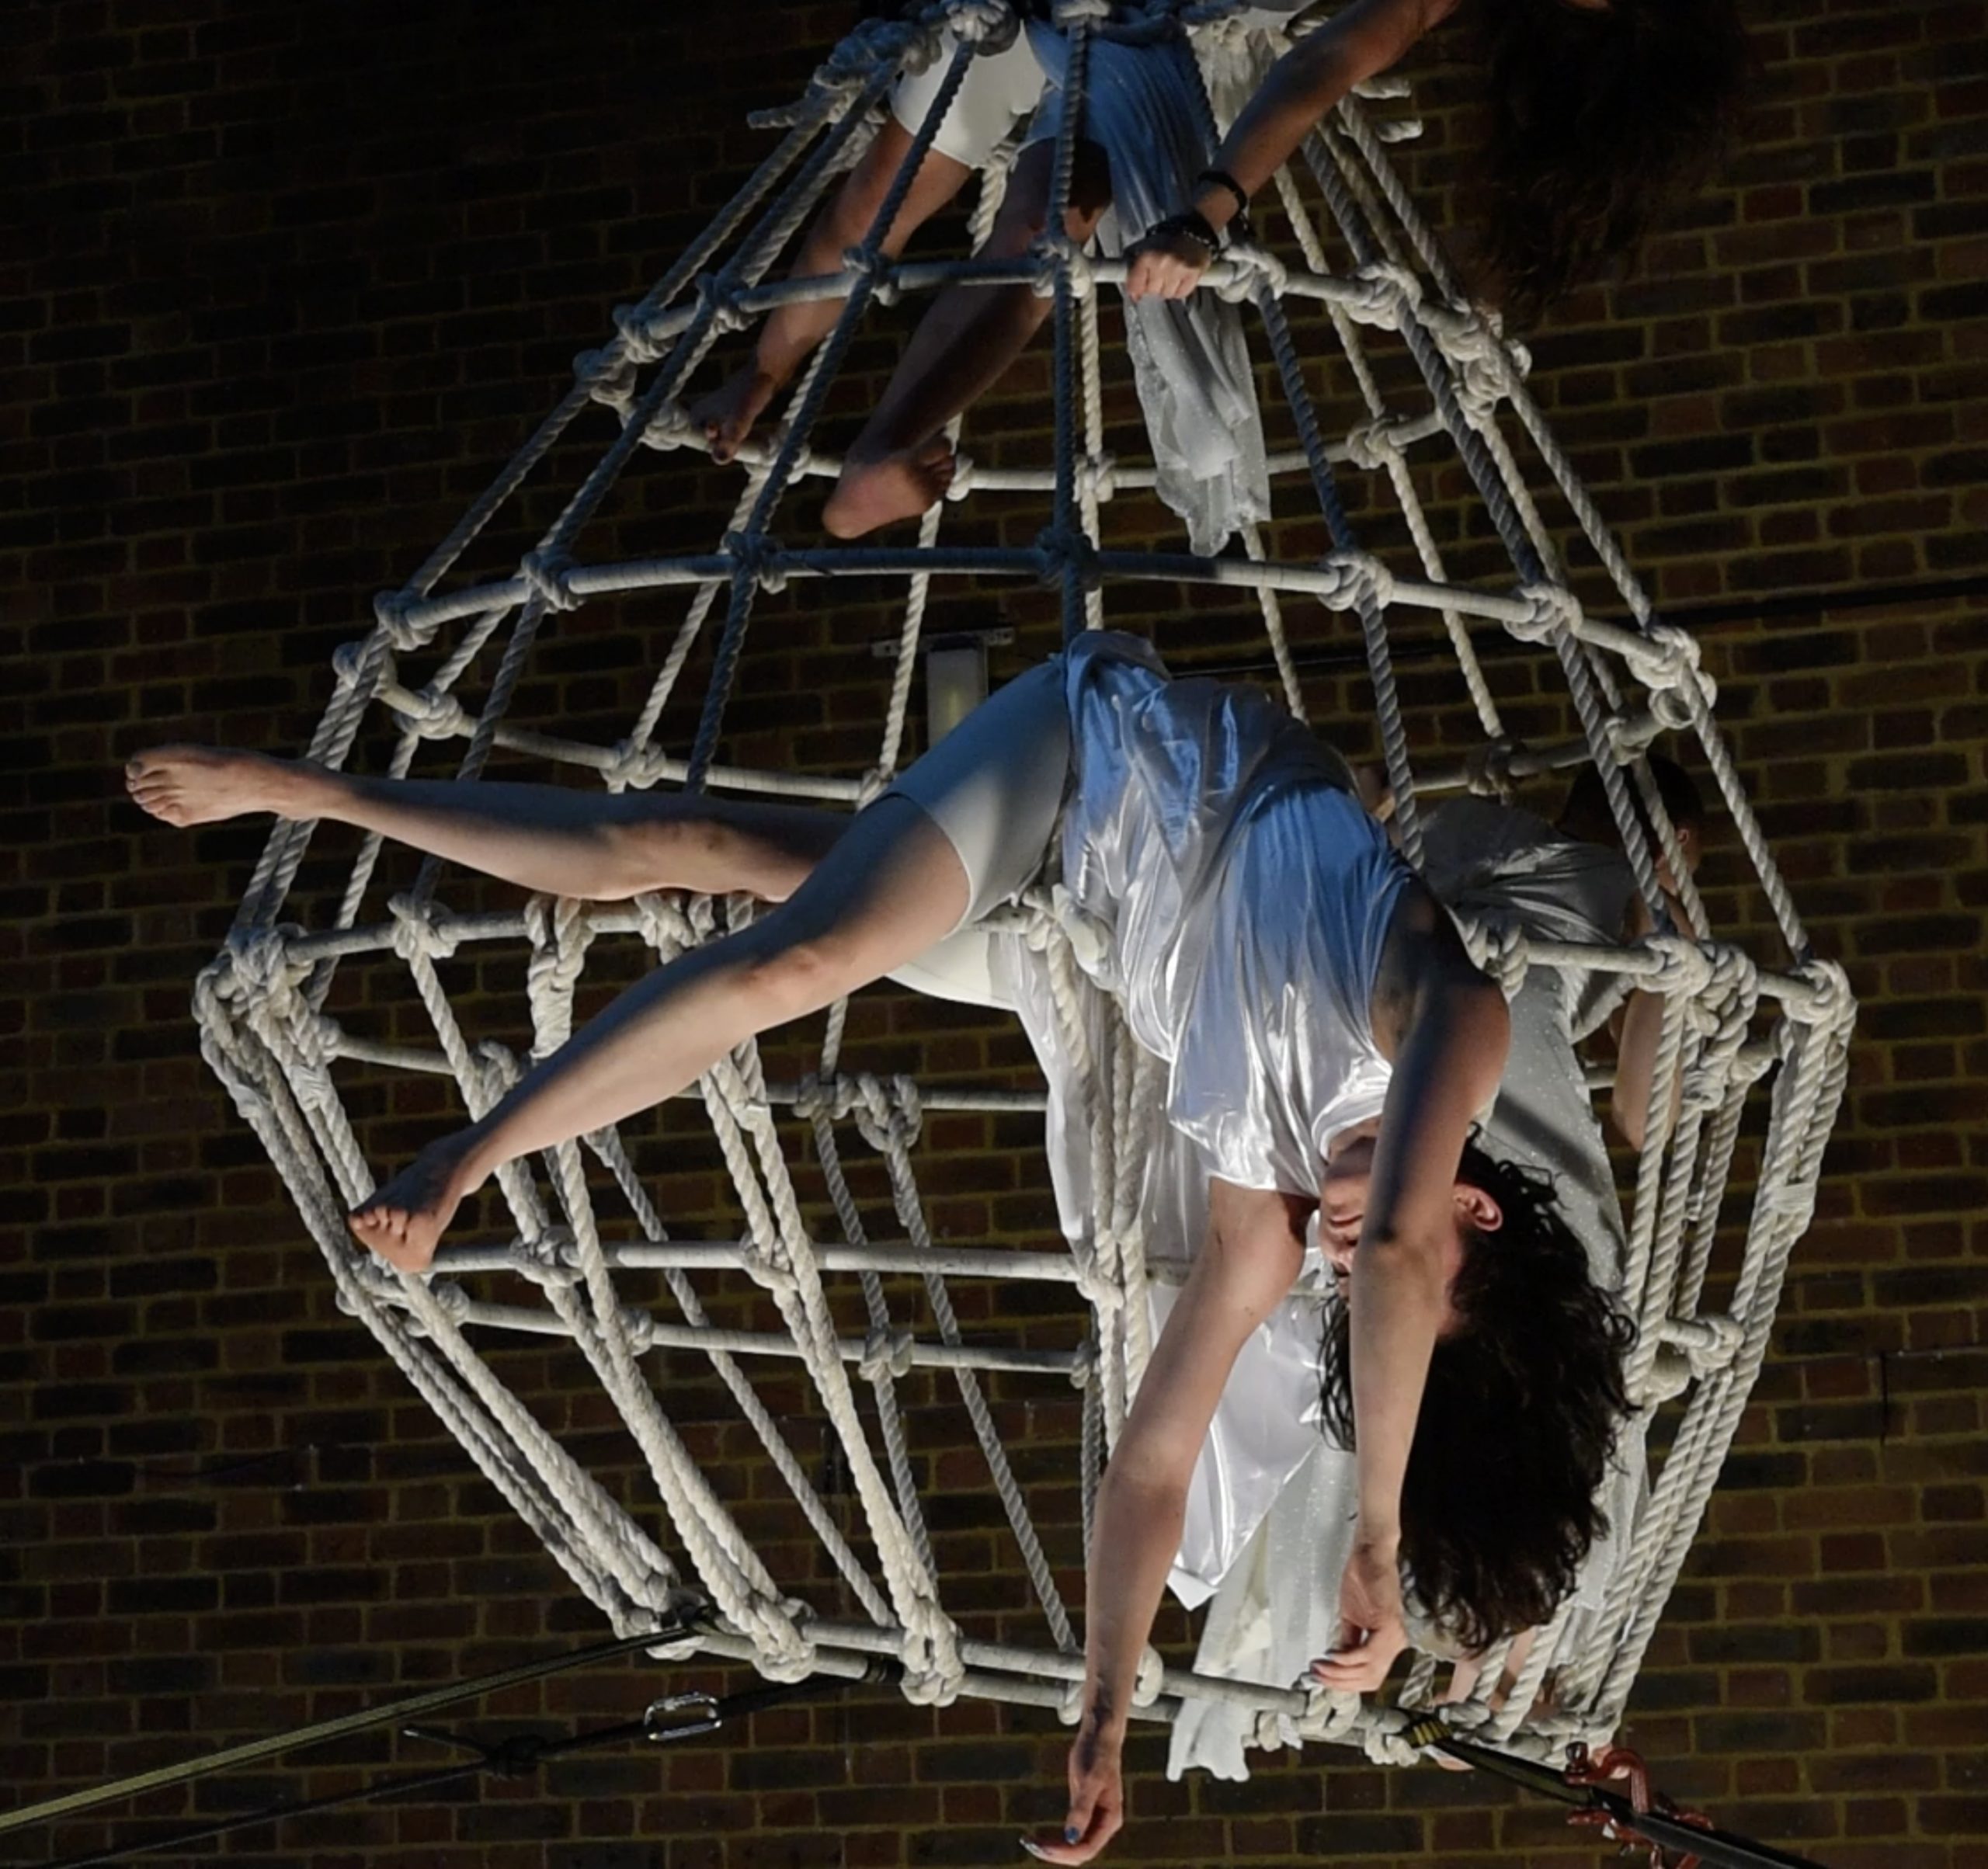 Performers in 'Fall to Fly', woman in white flowing costume suspended from a harness over white rope cage structure.